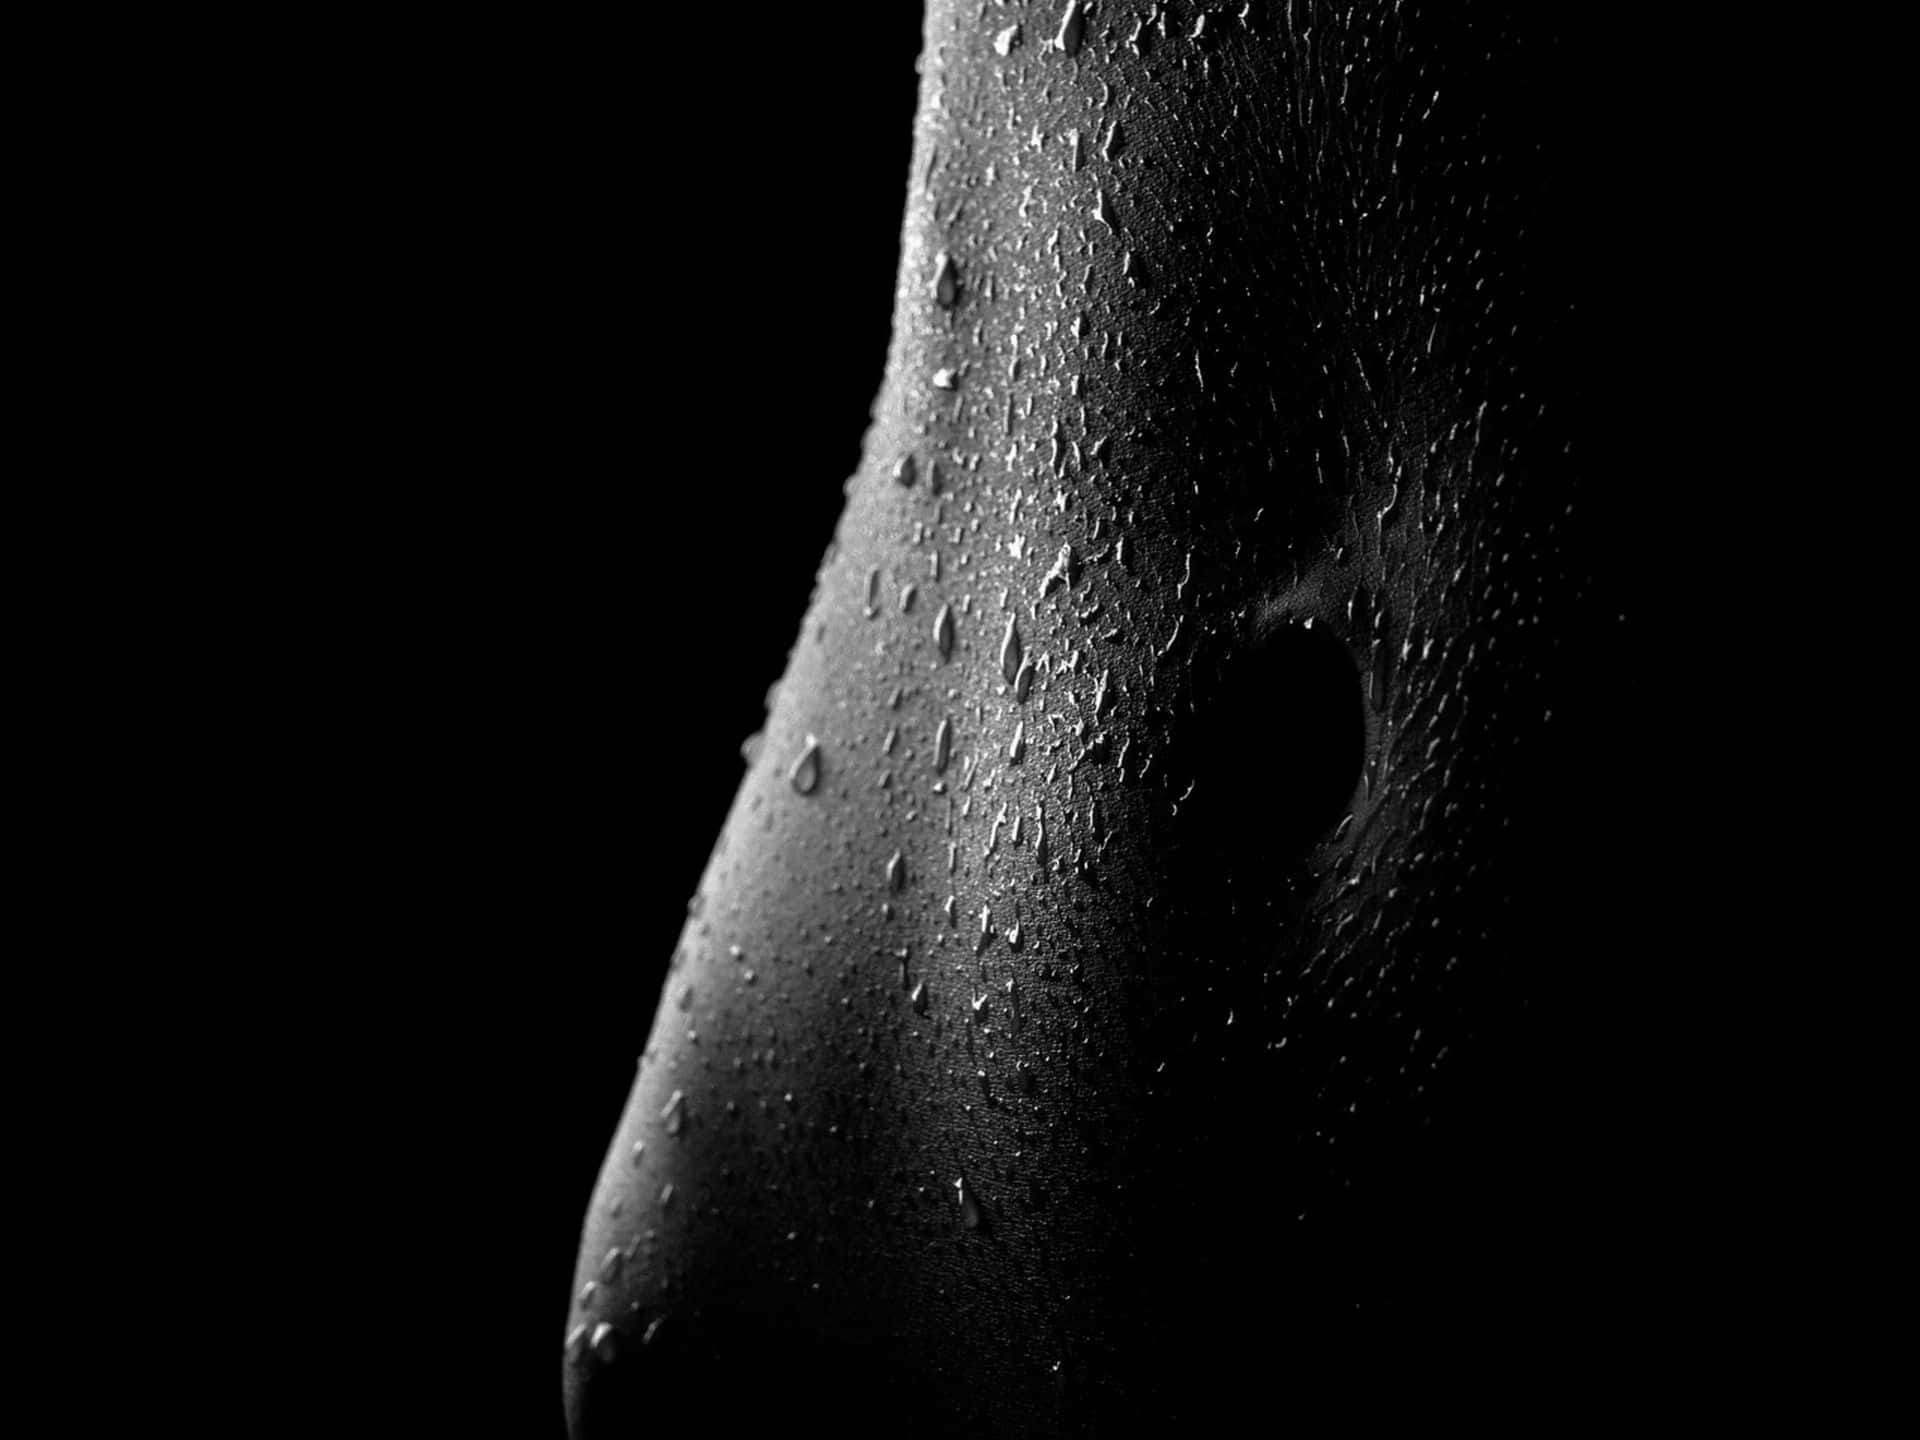 Female Body With Water Droplets Wallpaper